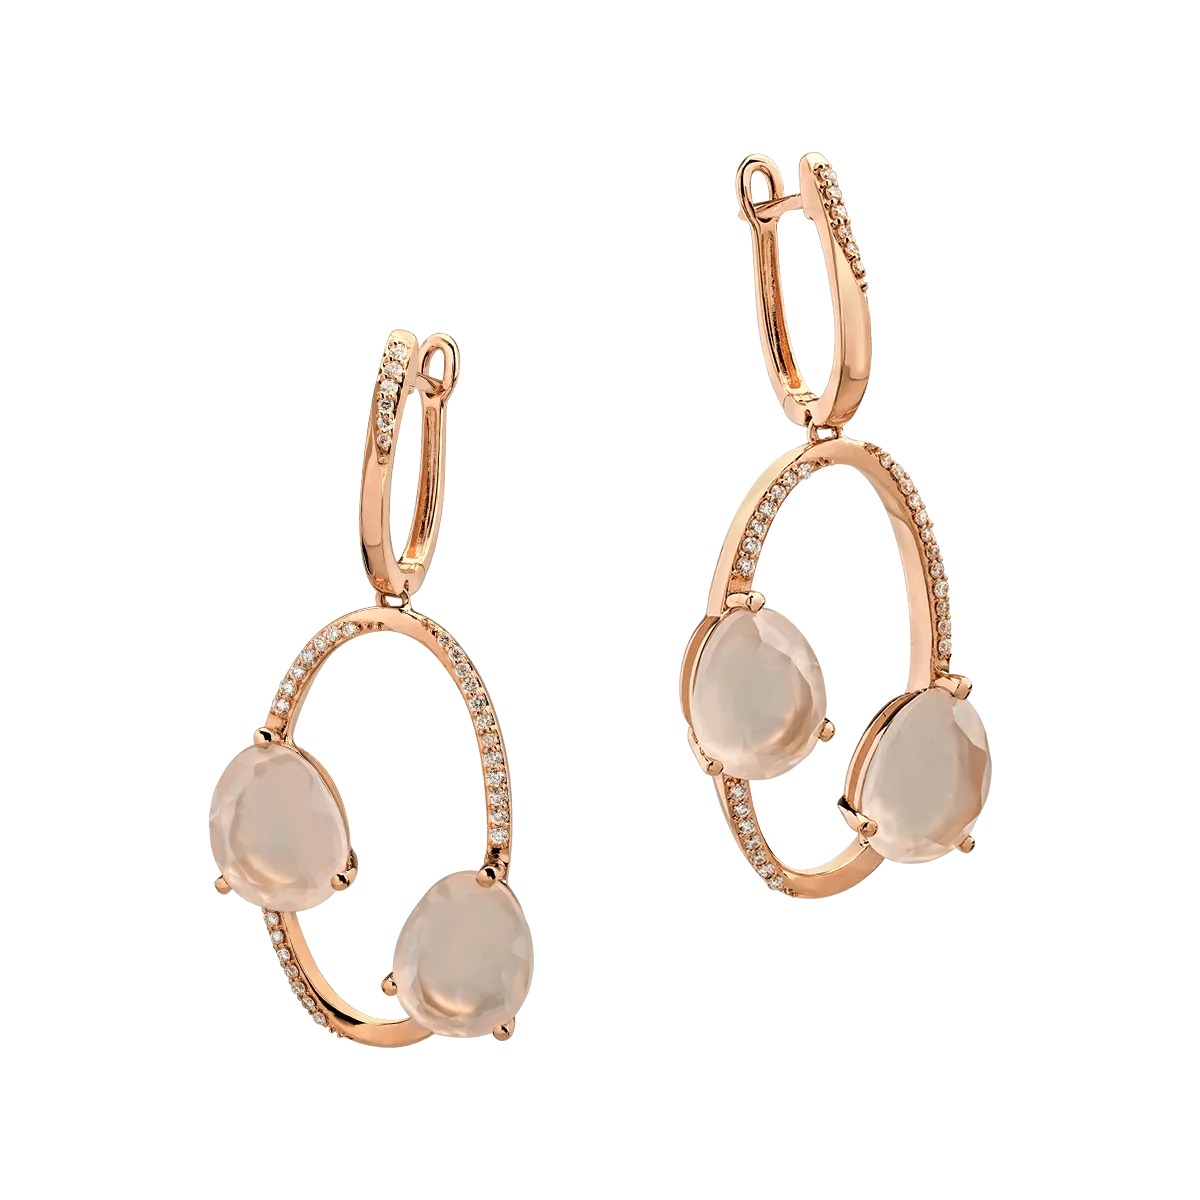 18K rose gold earrings with 7.655ct pink quartz and 0.277ct diamonds